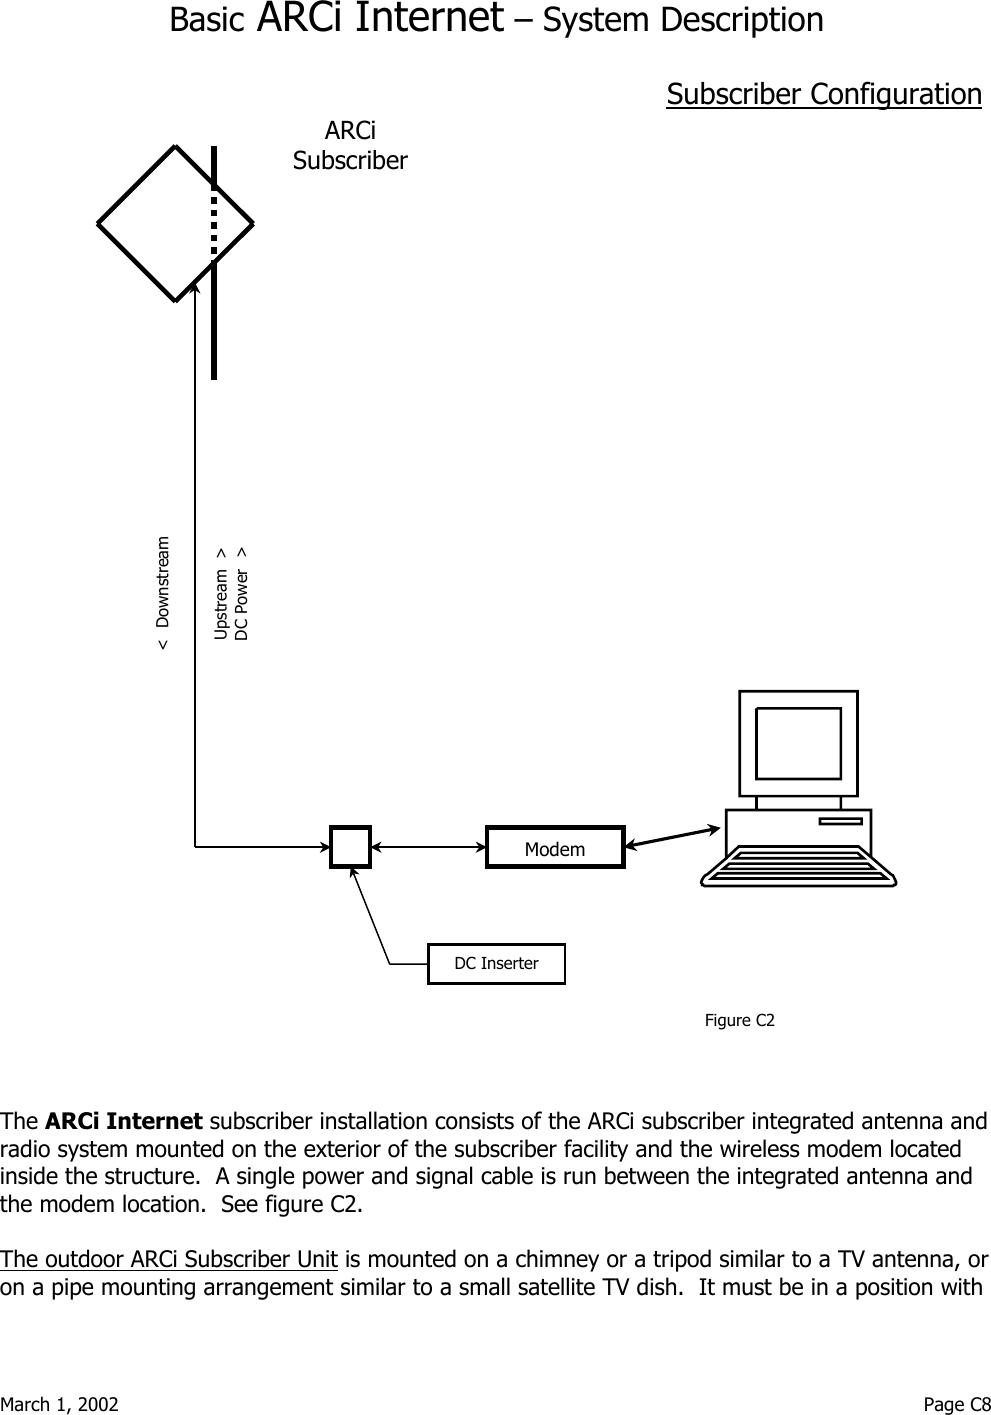  March 1, 2002                                                                                                                                         Page C8  Basic ARCi Internet – System Description                                                                           Subscriber Configuration                                                The ARCi Internet subscriber installation consists of the ARCi subscriber integrated antenna and radio system mounted on the exterior of the subscriber facility and the wireless modem located inside the structure.  A single power and signal cable is run between the integrated antenna and the modem location.  See figure C2.  The outdoor ARCi Subscriber Unit is mounted on a chimney or a tripod similar to a TV antenna, or on a pipe mounting arrangement similar to a small satellite TV dish.  It must be in a position with ModemDC InserterARCi SubscriberUpstream  &gt; DC Power  &gt; &lt;  Downstream Figure C2 